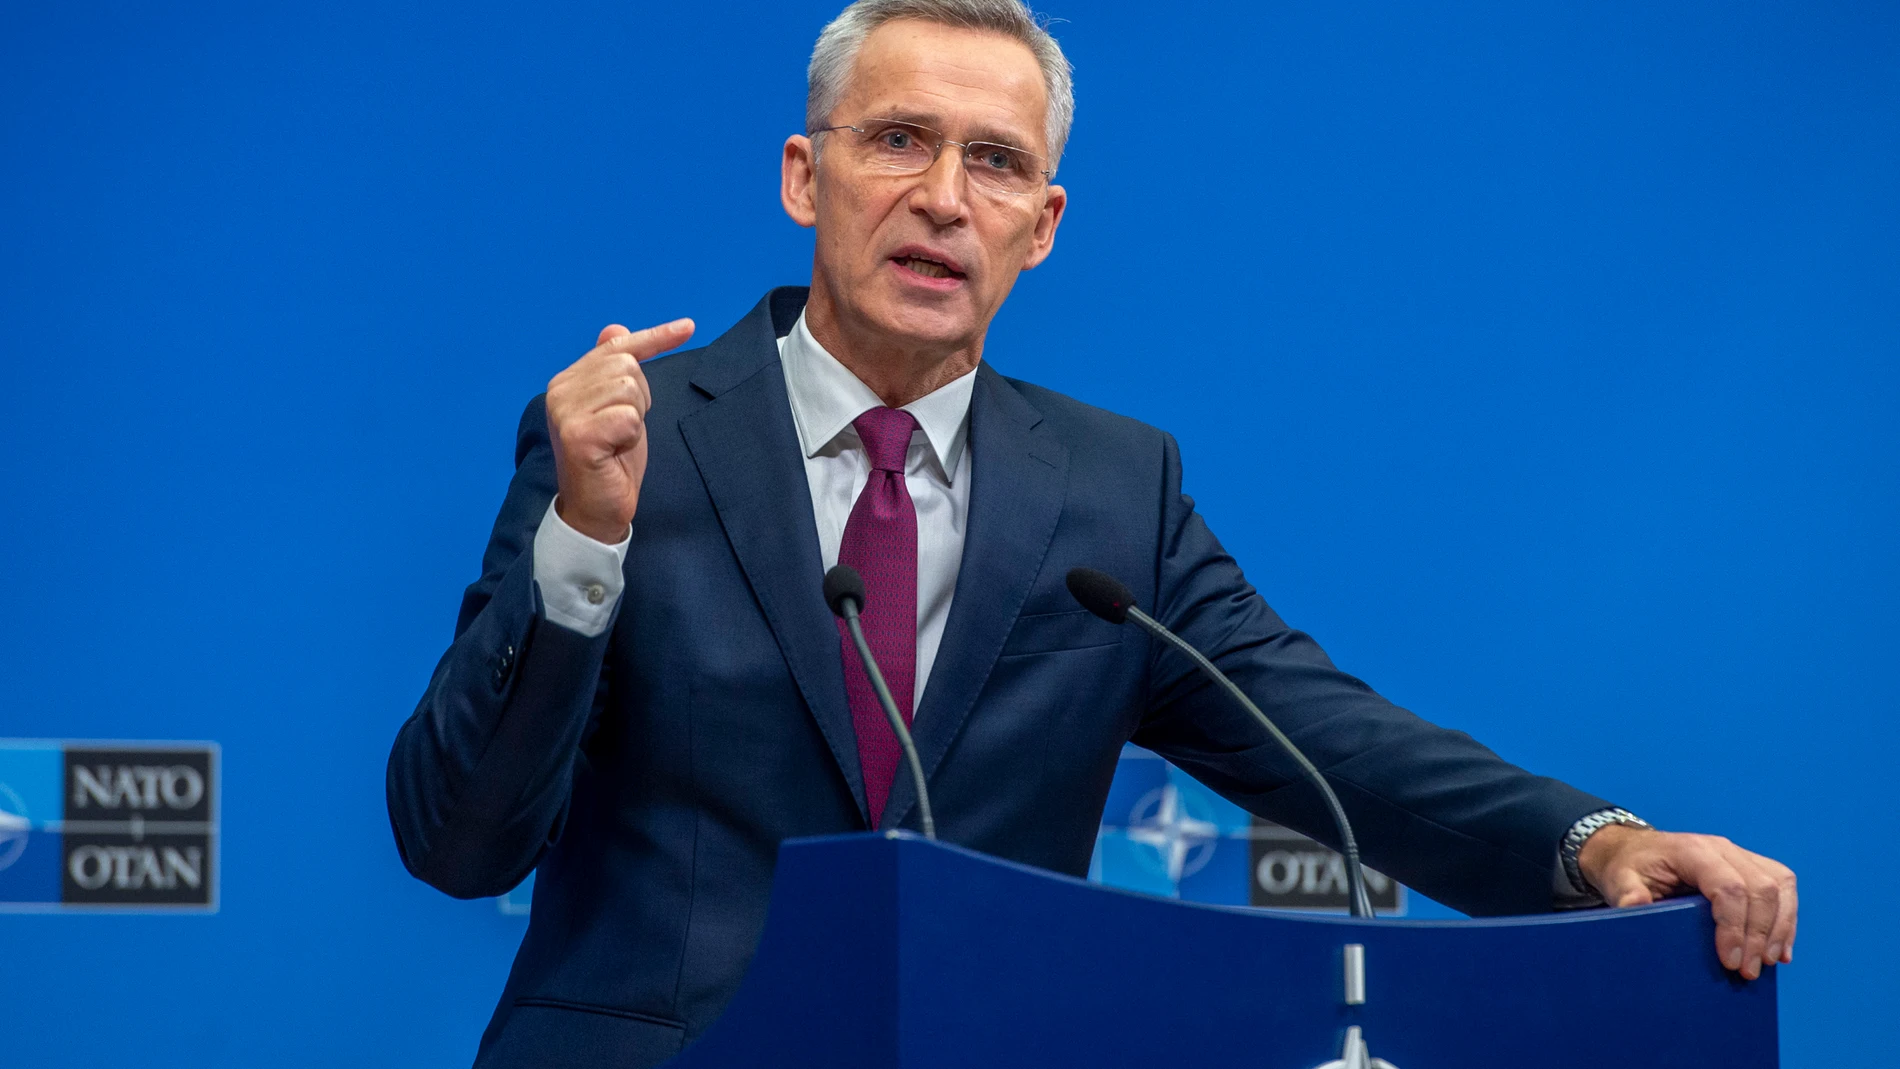 NATO Secretary General press conference in Brussels